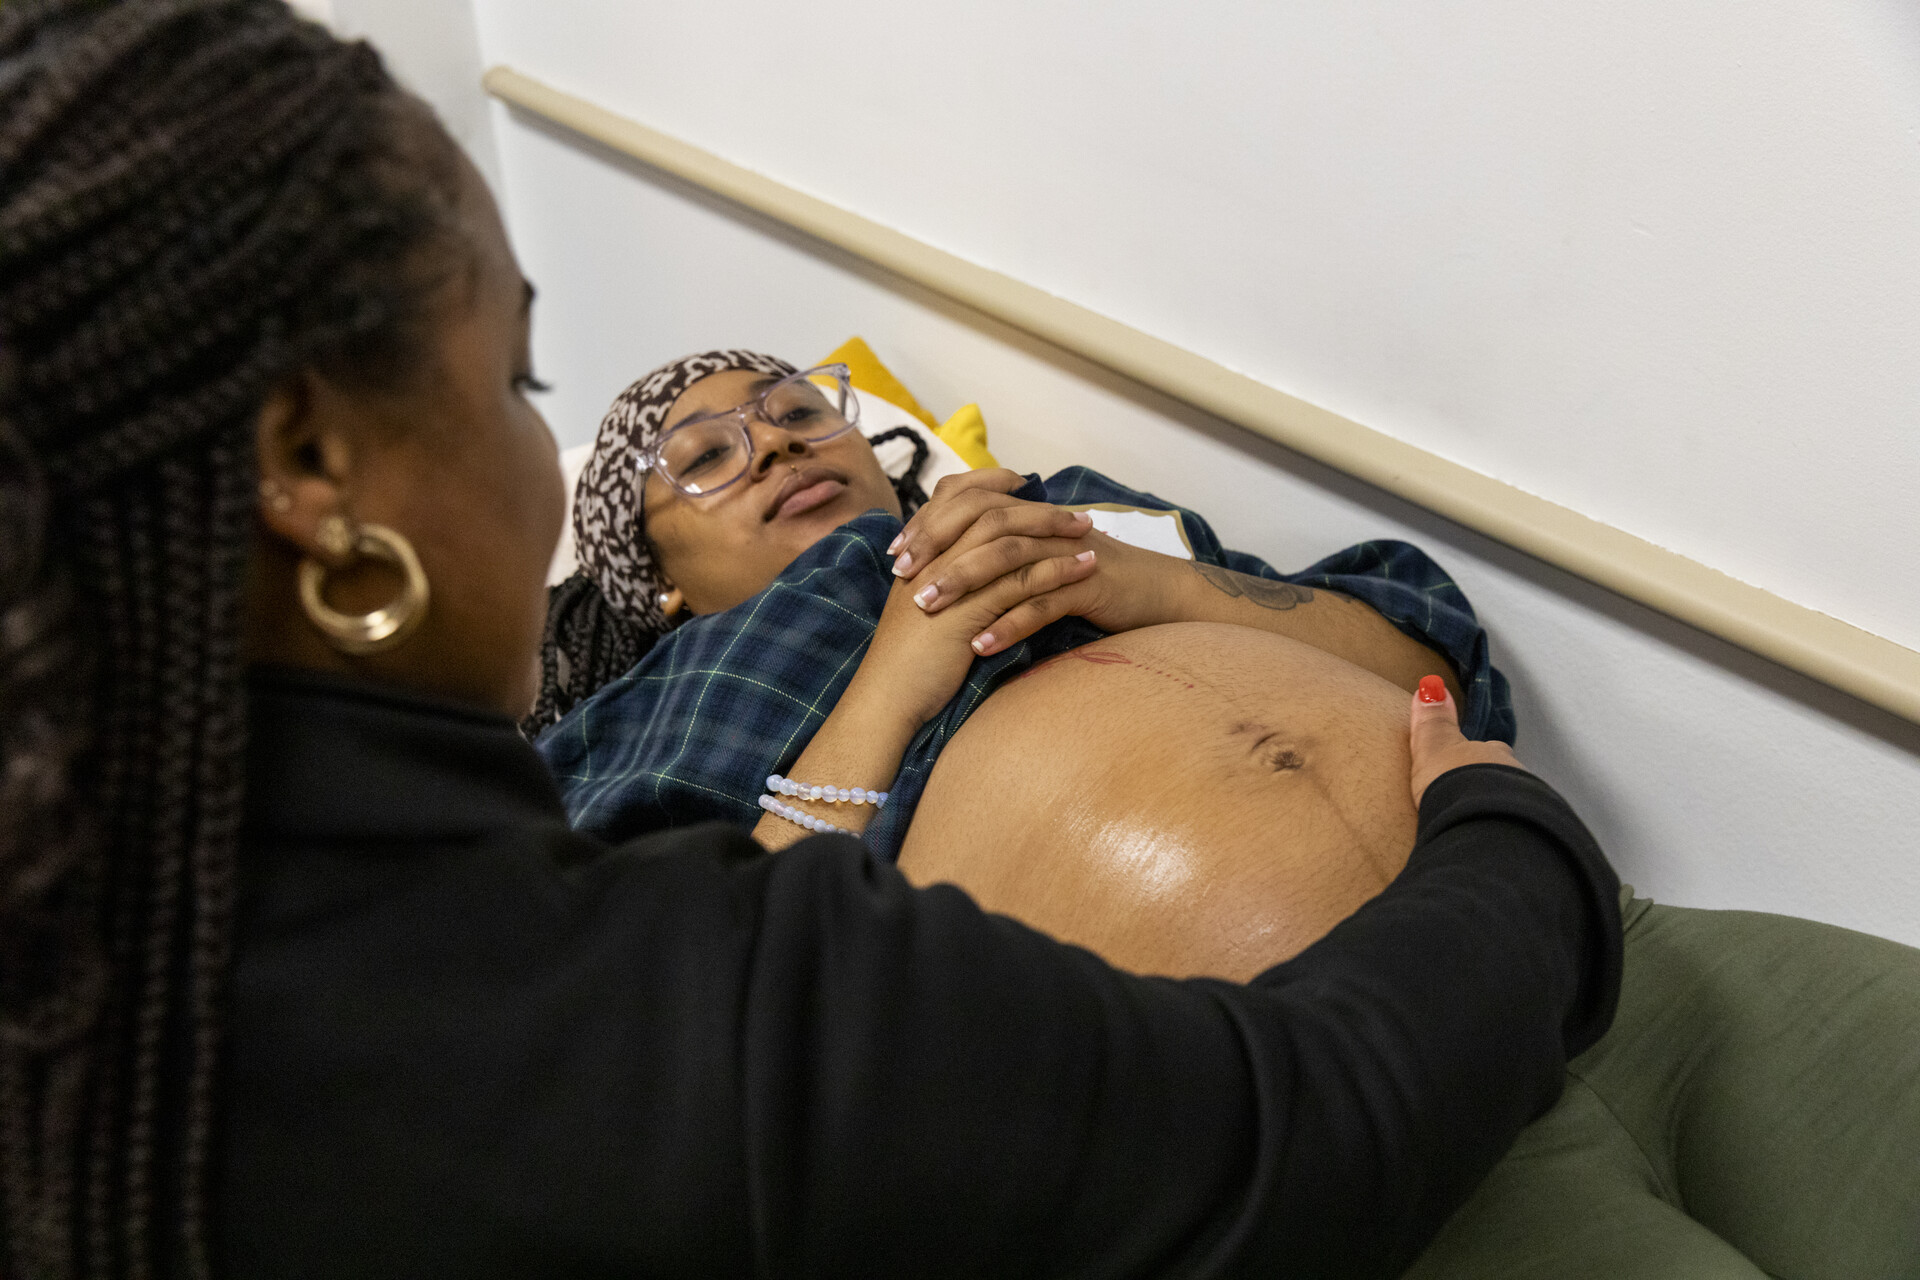 A pregnant woman is laying down and receiving prenatal care from another woman.